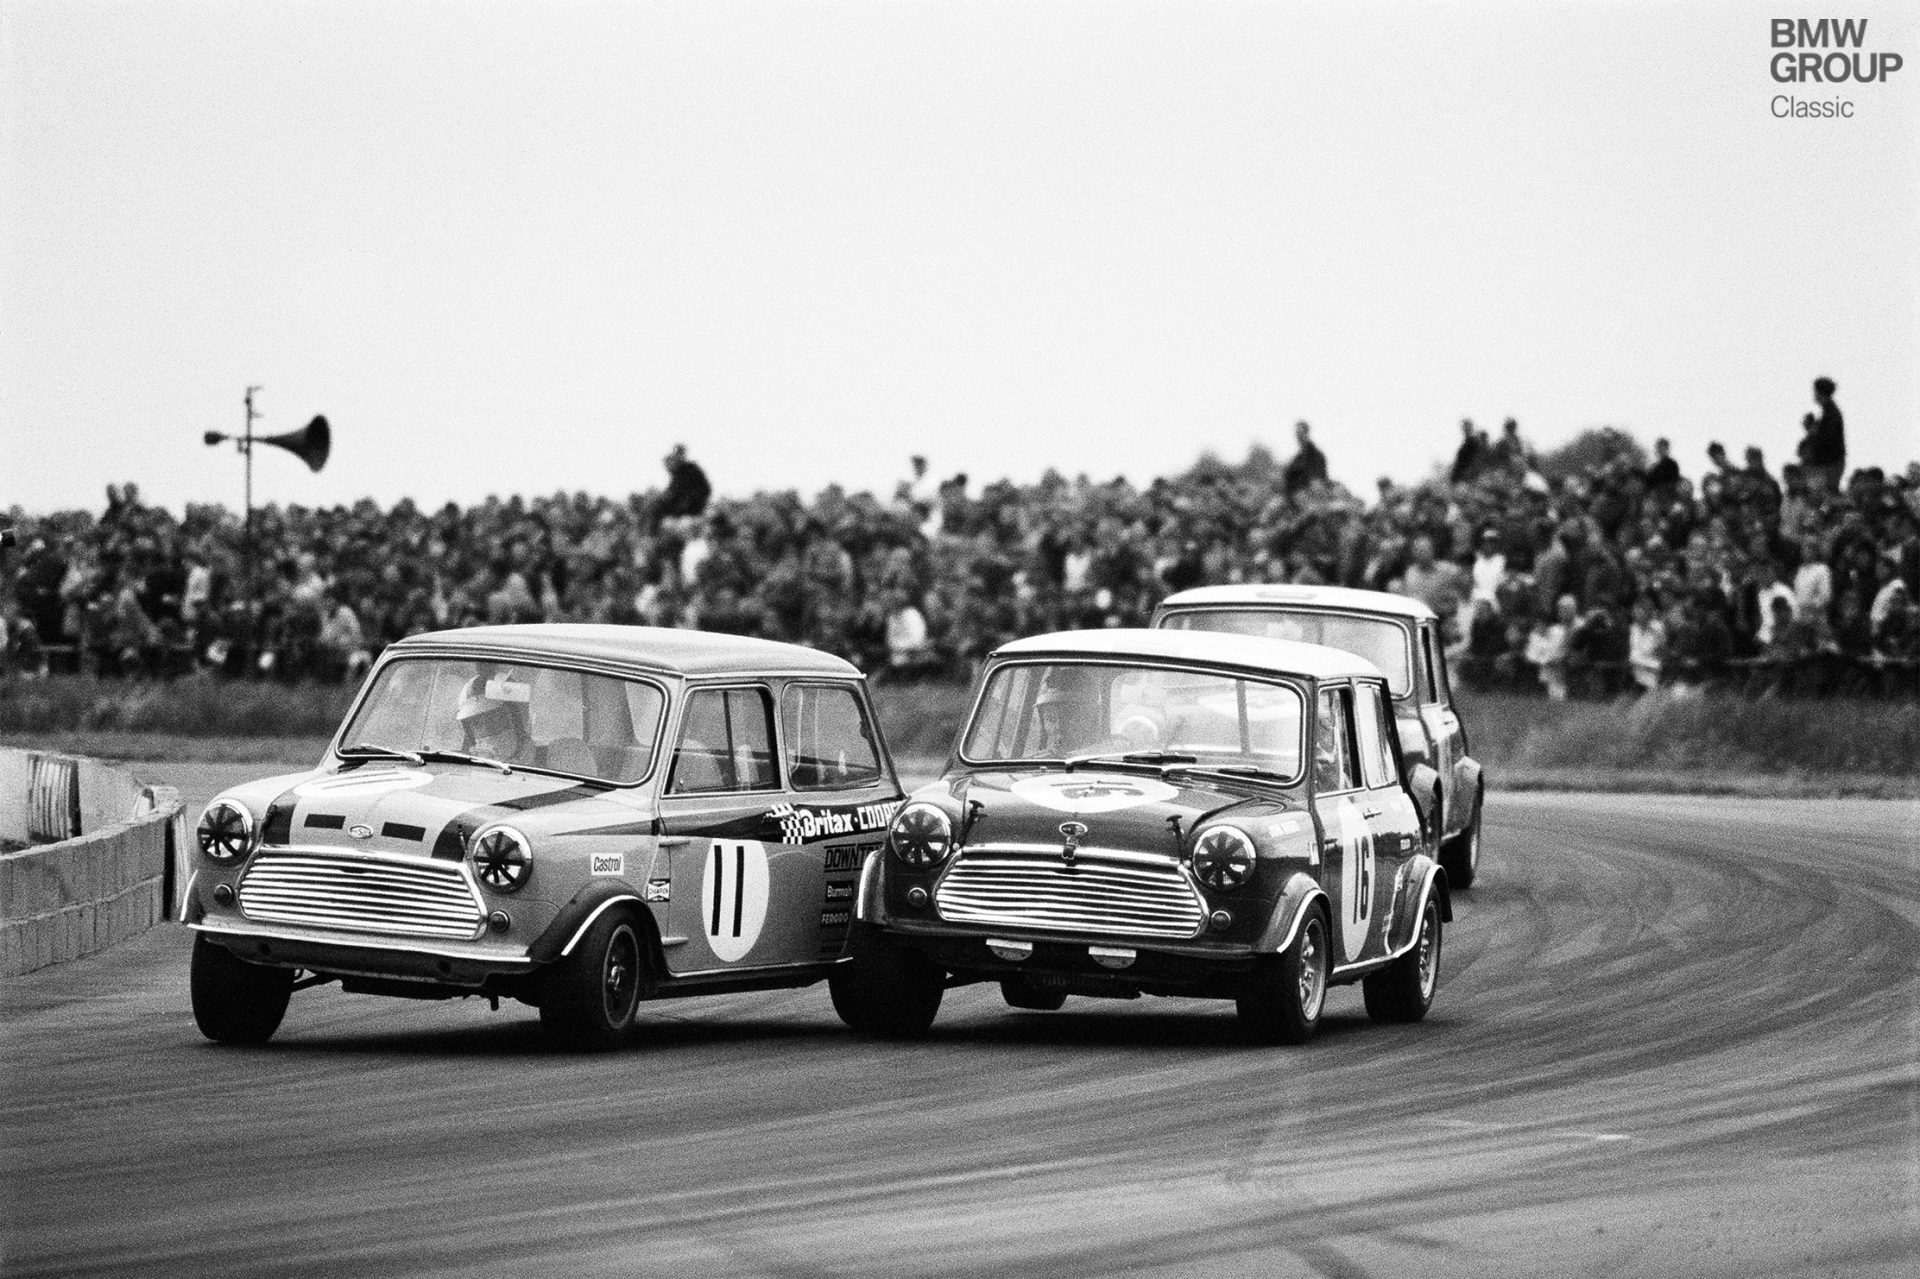 Steve Neal on a Morris Mini-Cooper S, entered by Britax-Cooper-Downton, in front of John Rhodes